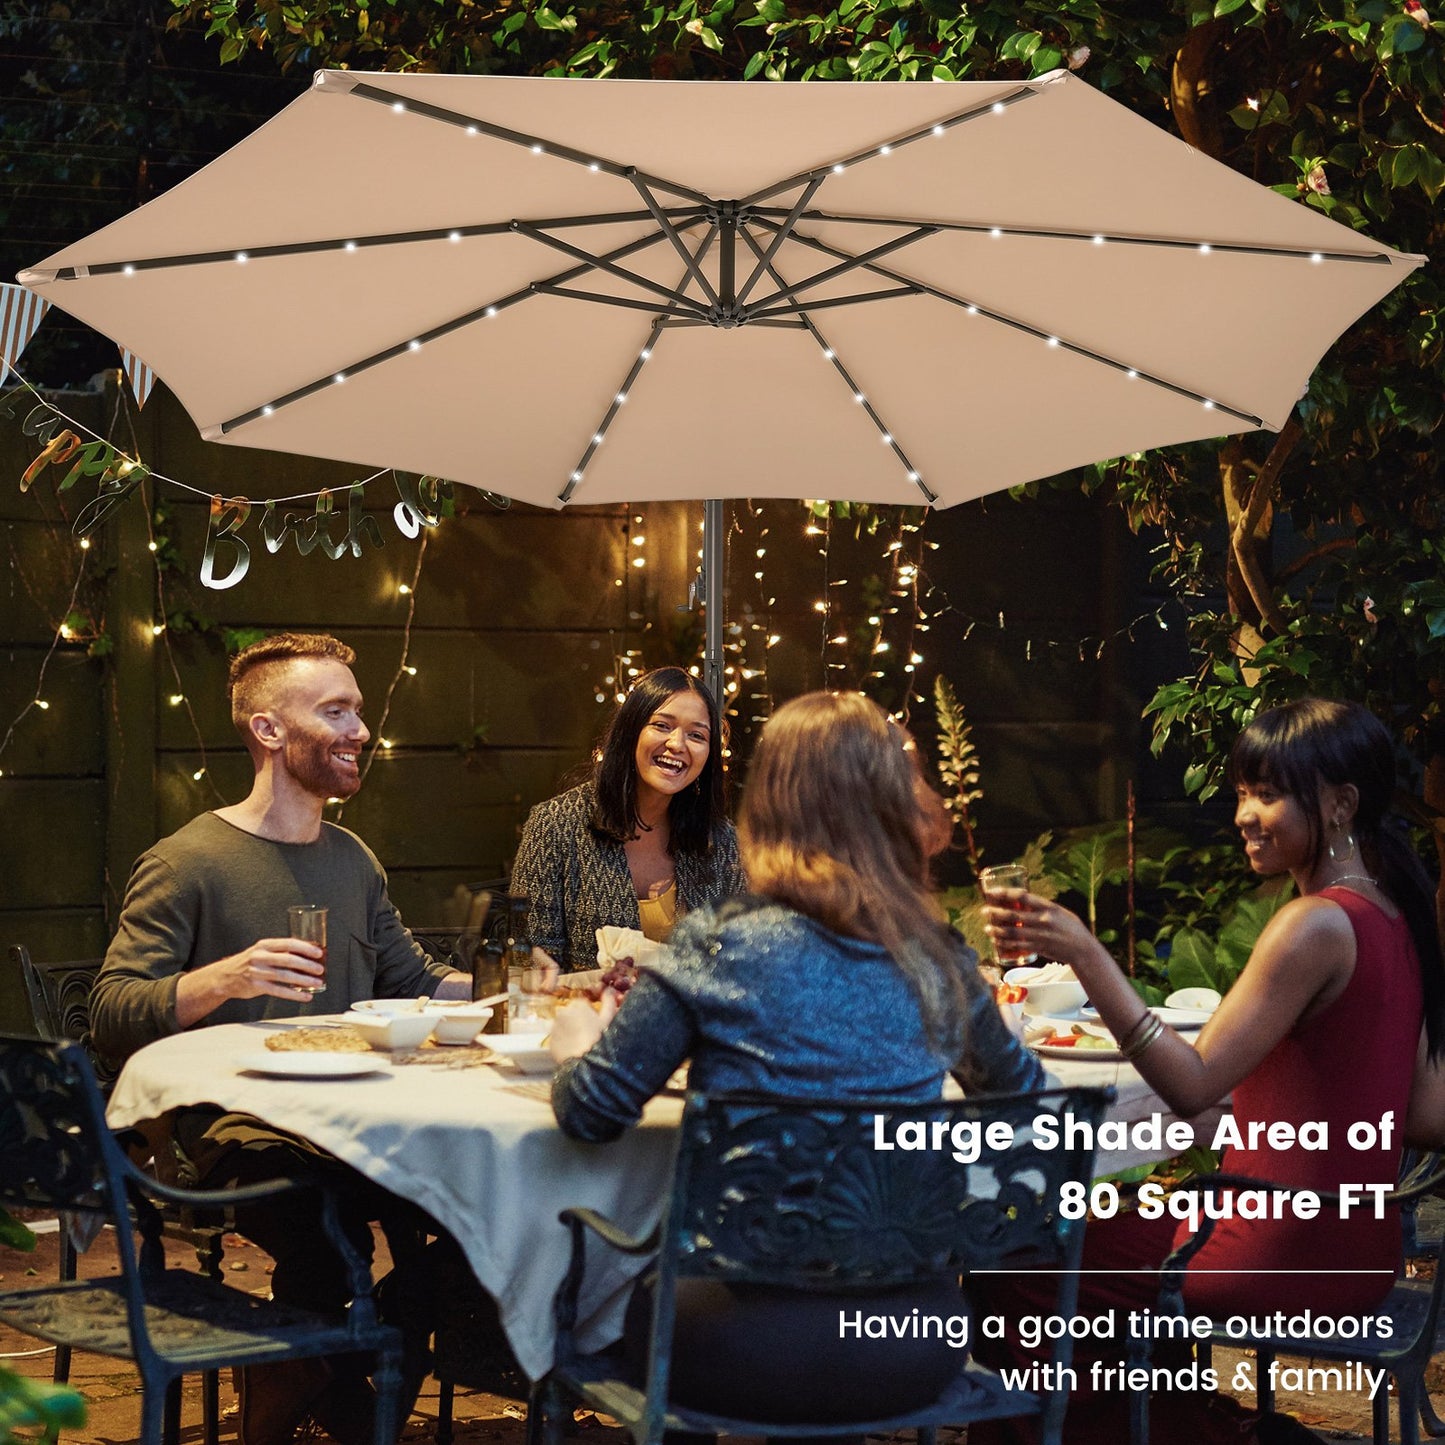 10 Feet Cantilever Umbrella with 32 LED Lights and Solar Panel Batteries, Beige